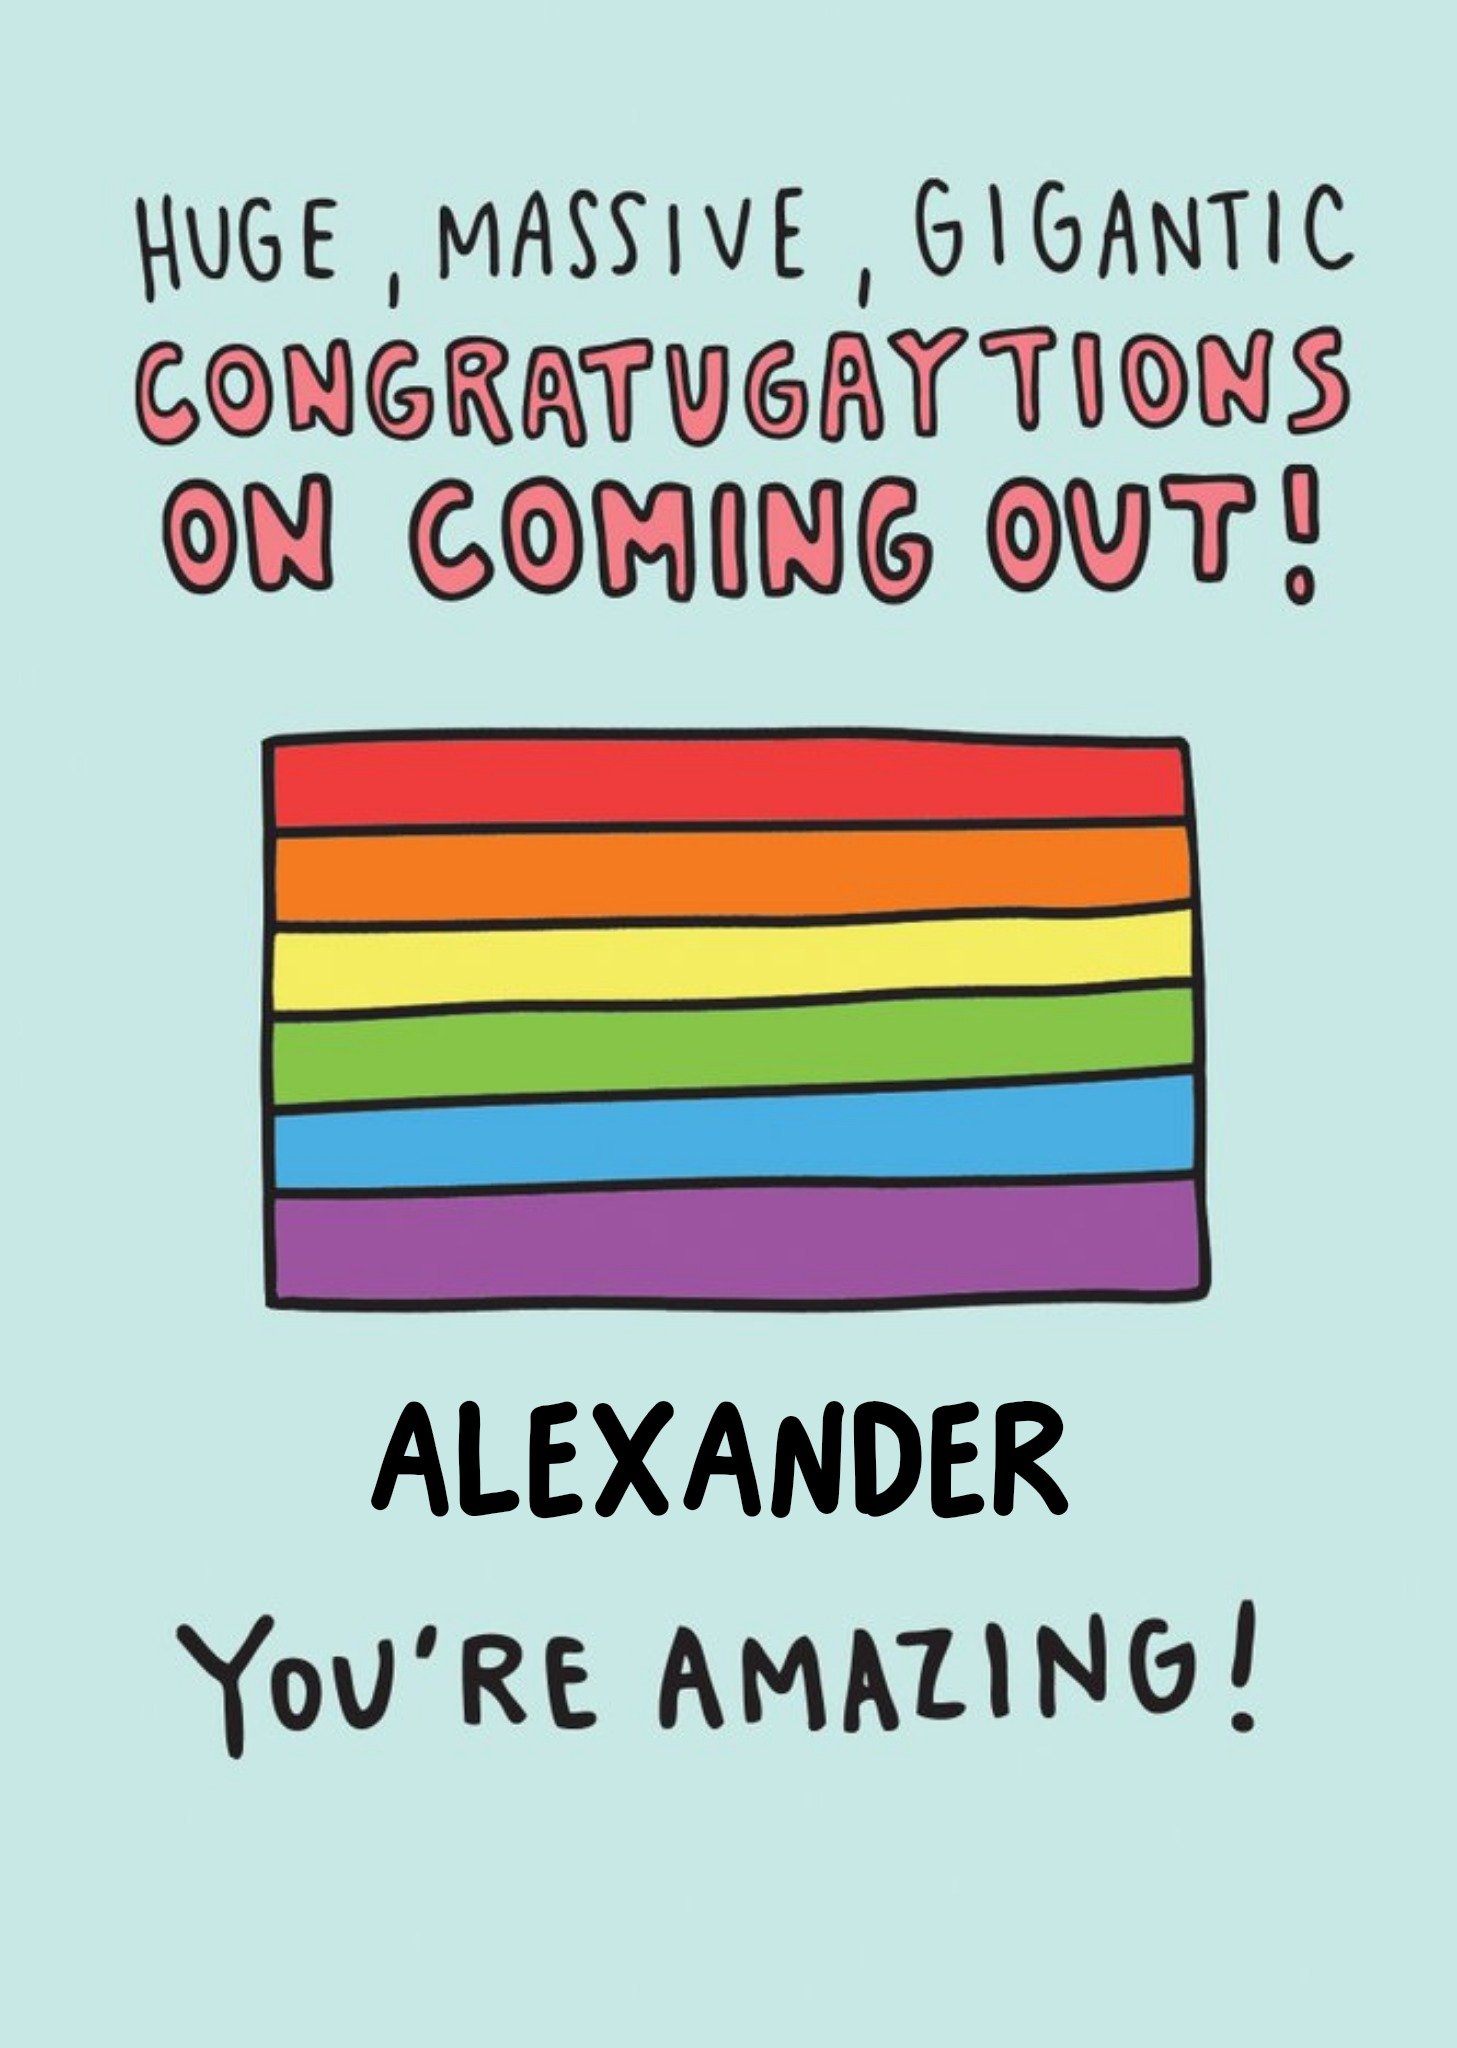 Moonpig Congratulations On Coming Out Card - Pride Flag, Large